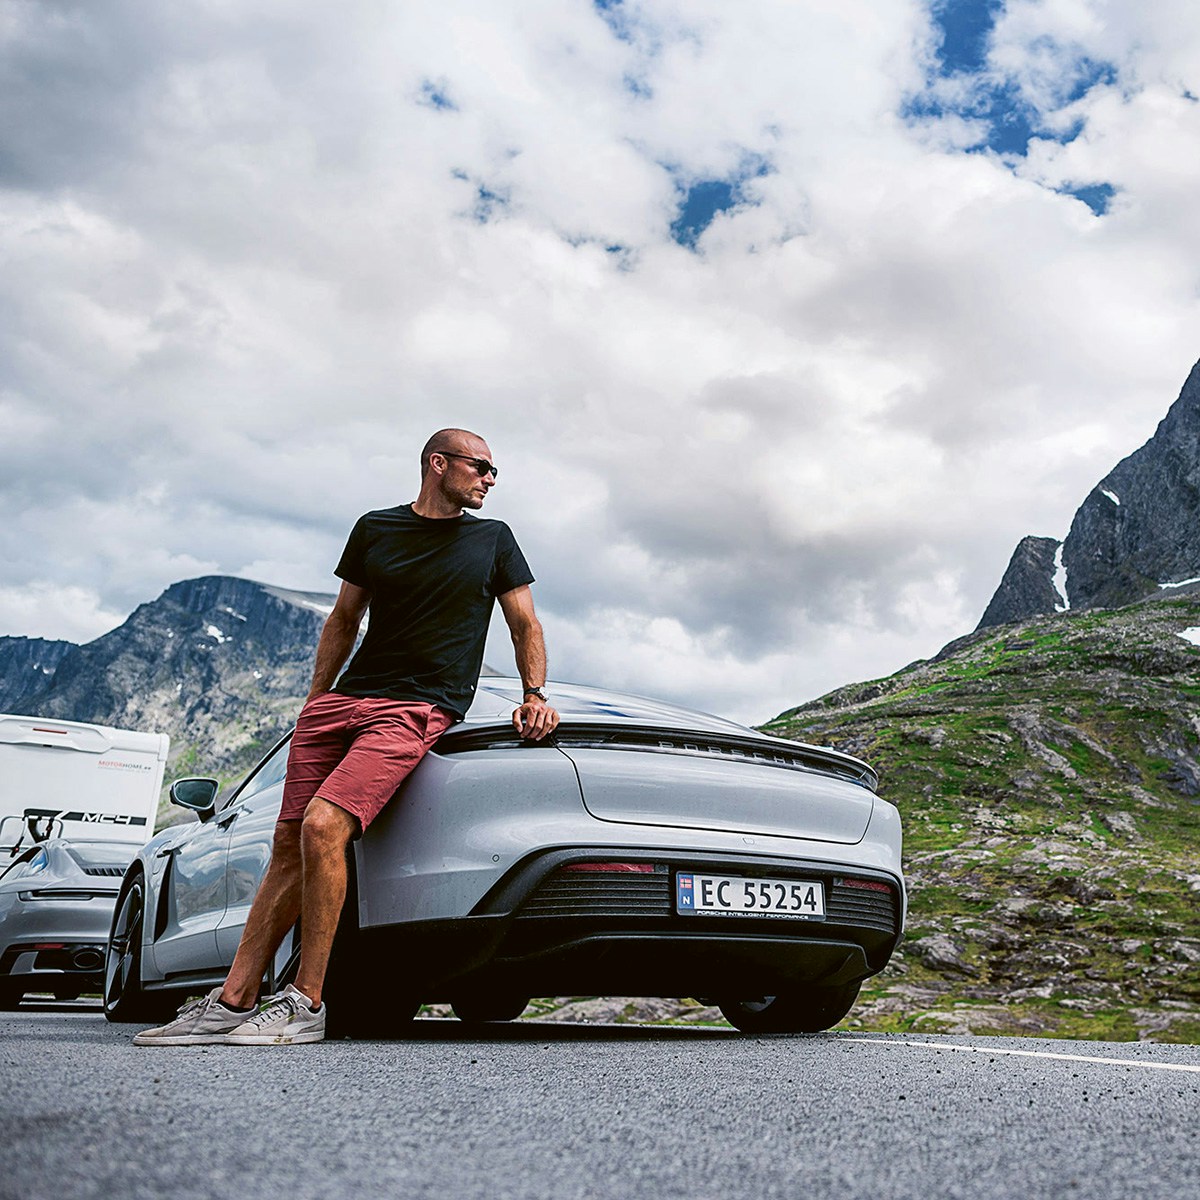 A man leans against a Porsche parked on the side of a road with snowy mountains in the background.